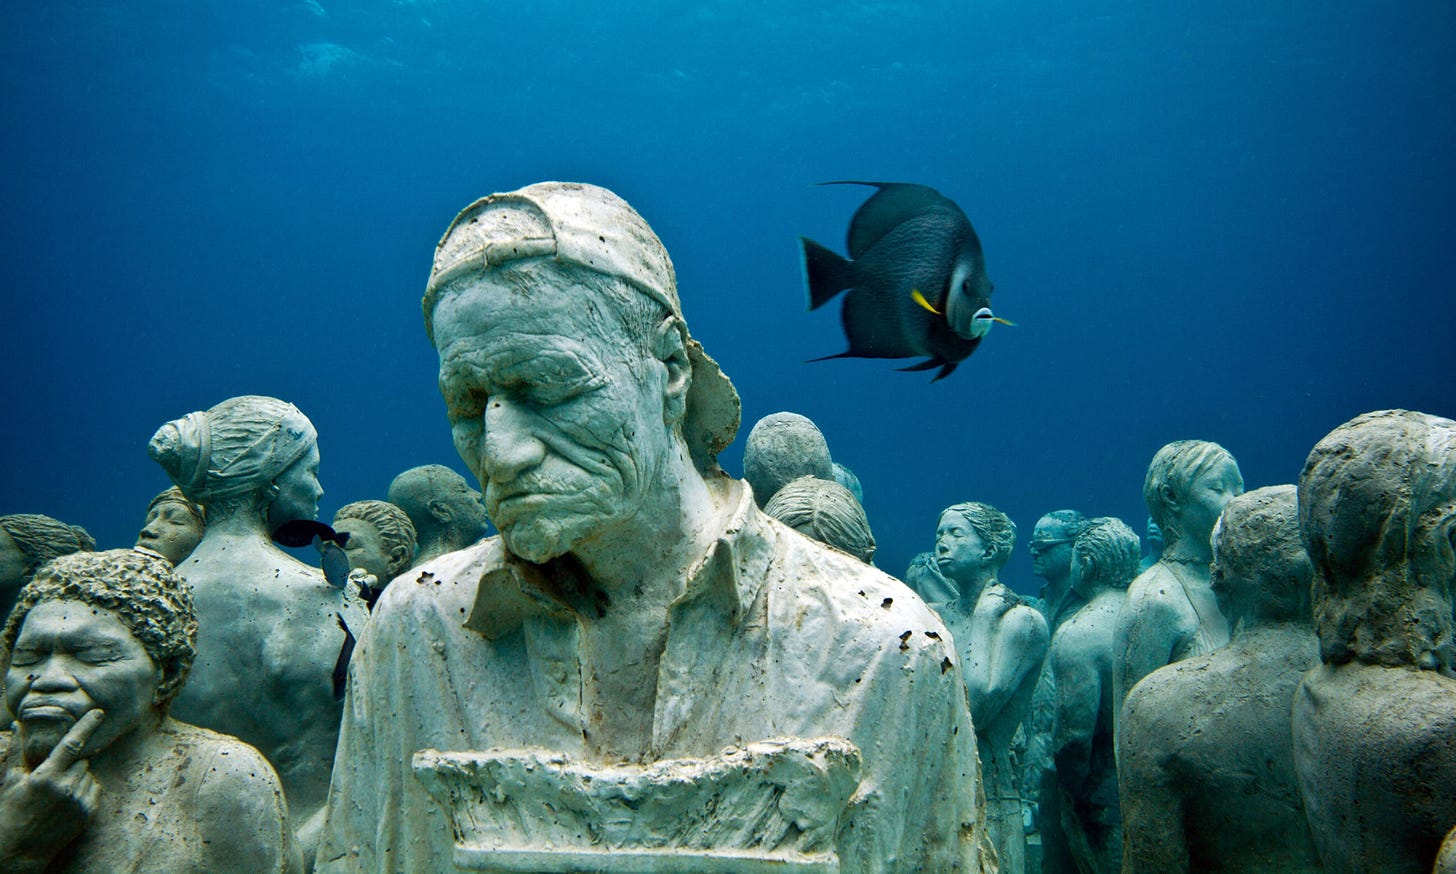 Gallery: The sculpture garden at the bottom of the sea |